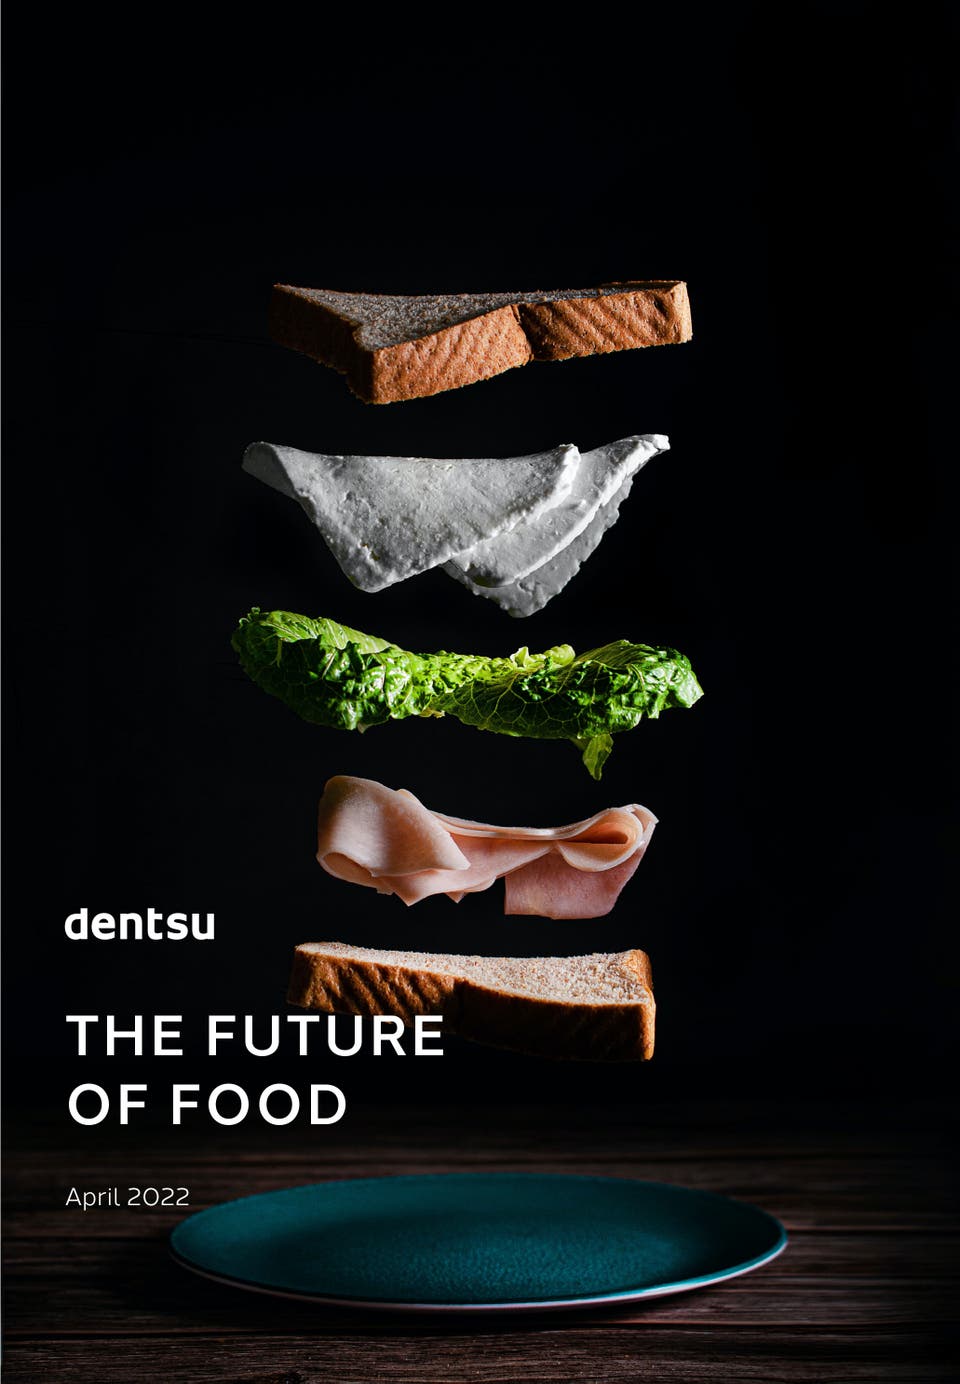 The Future of Food - from dentsu Intelligence